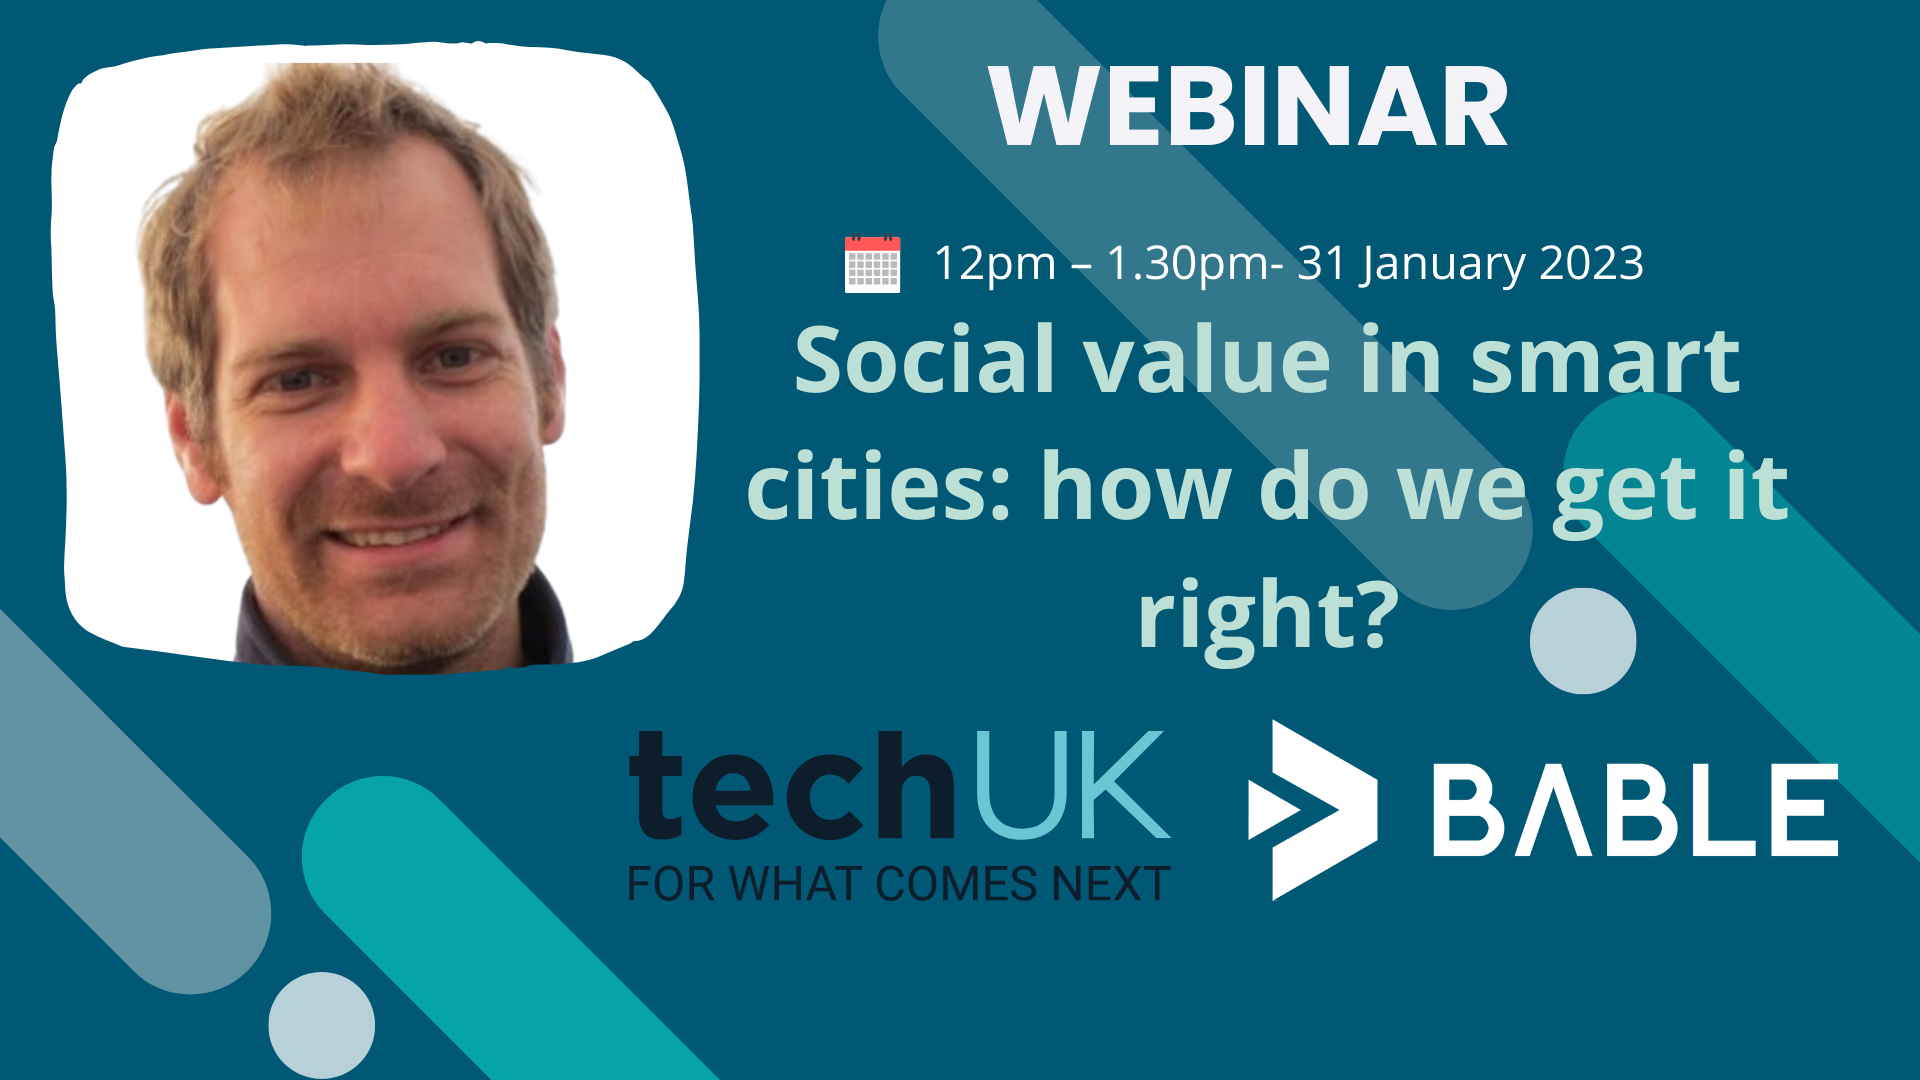 Webinar: Social value in smart cities: how do we get it right?